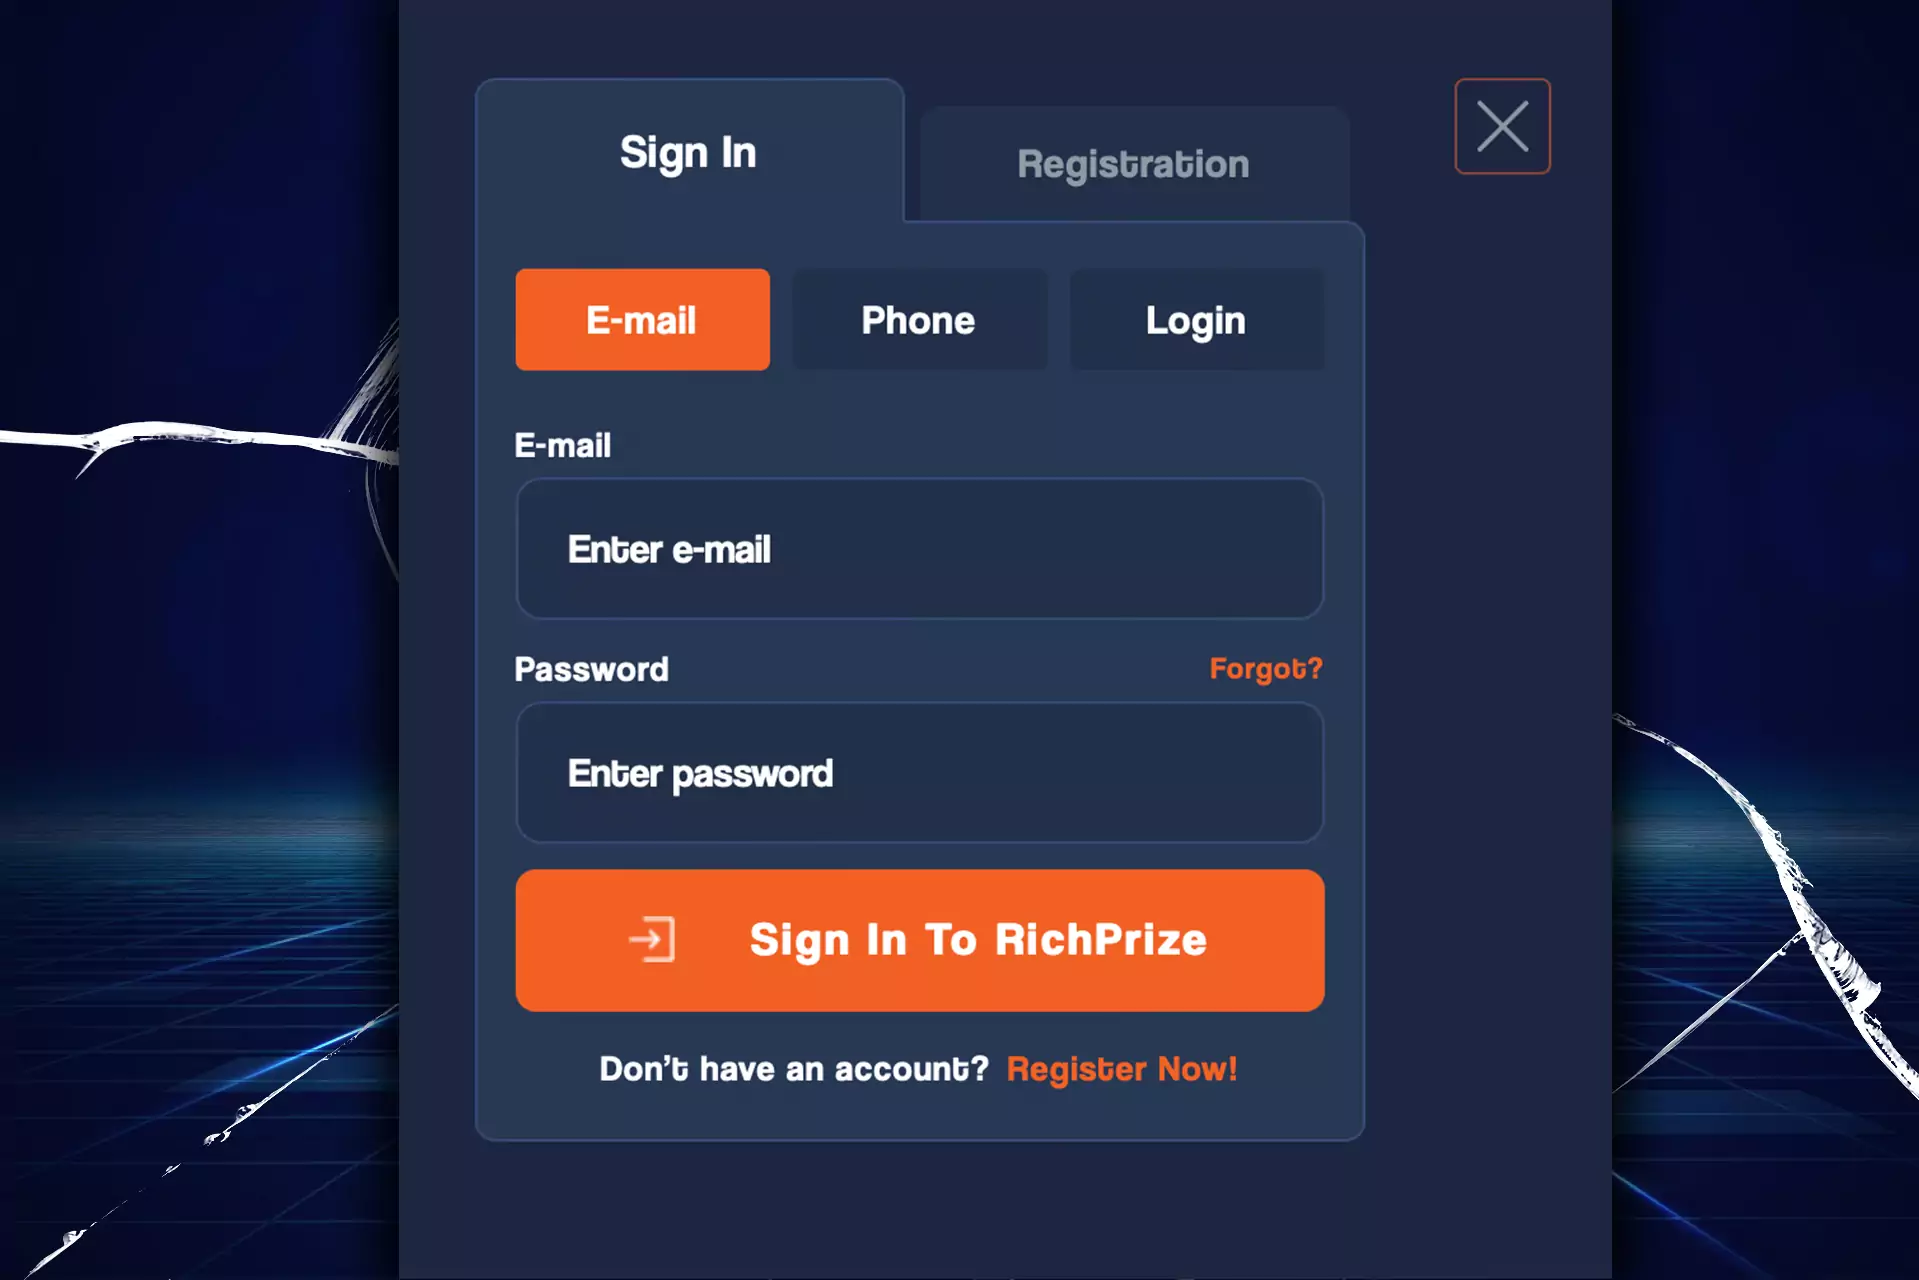 After you create an account, you can log in.